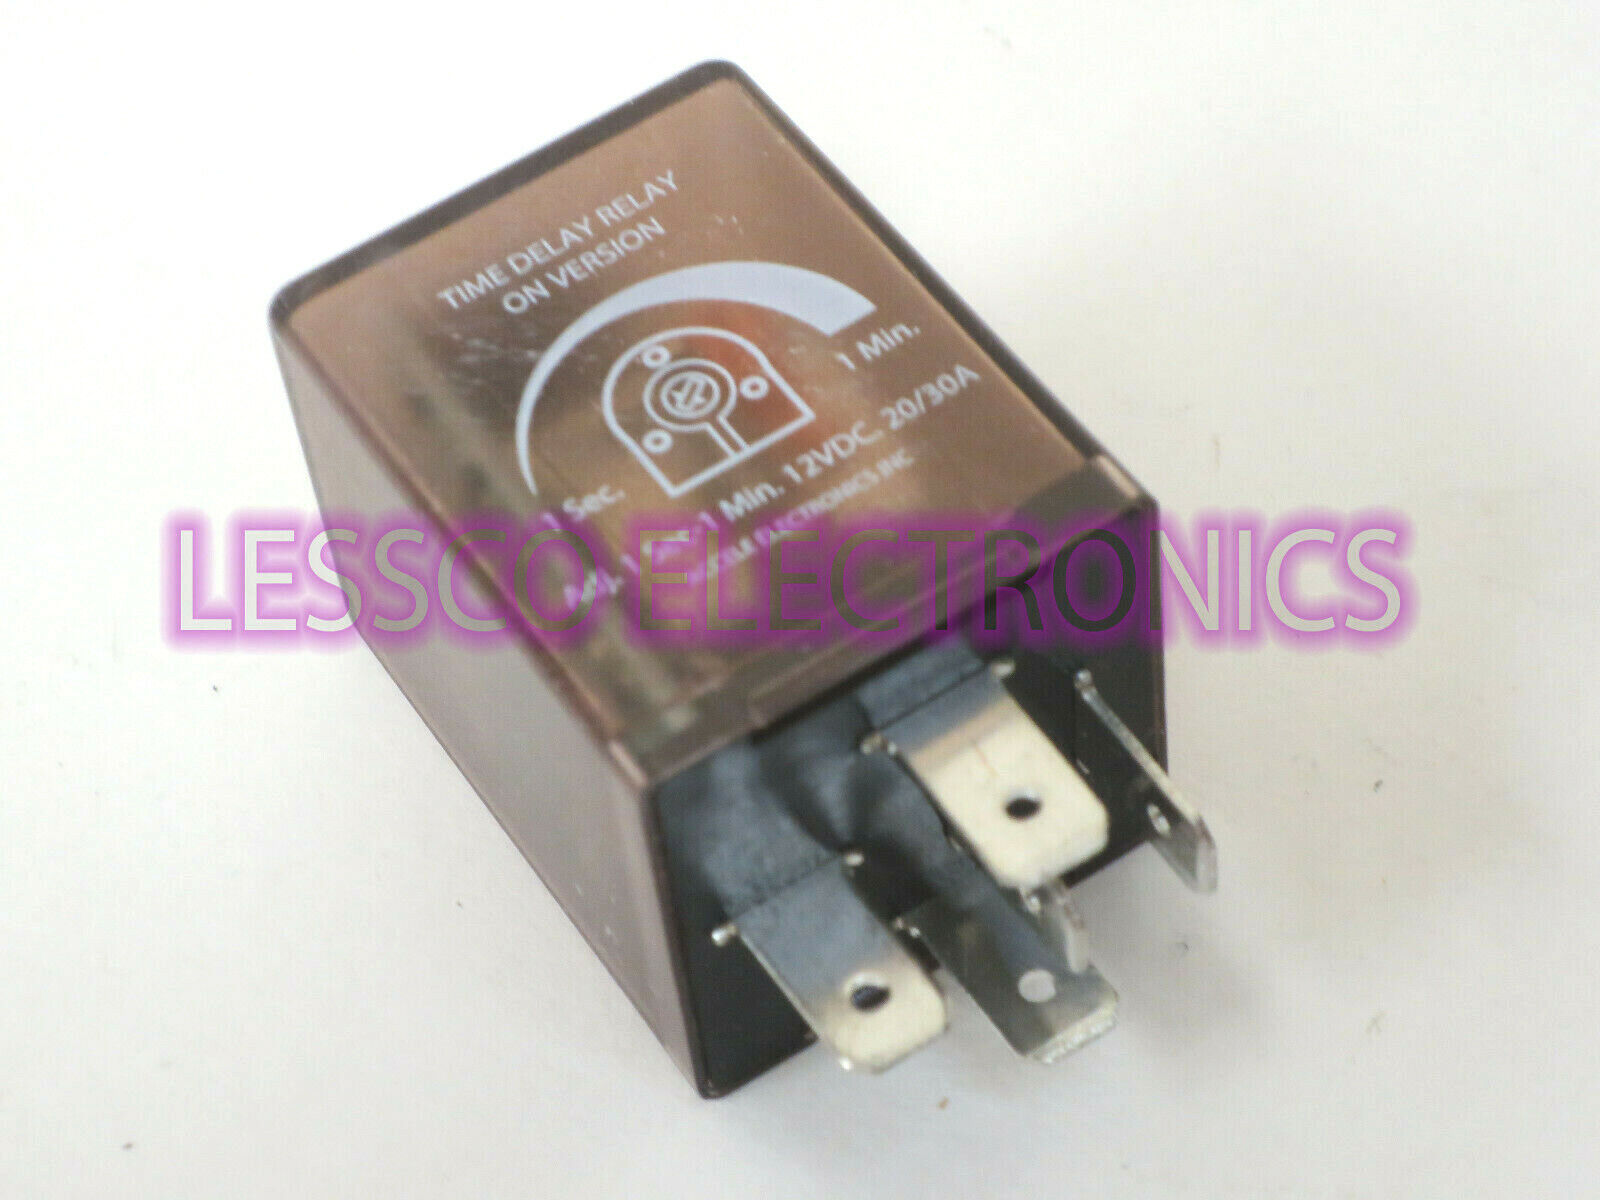 Accele BU-510TD 30 Amp Programmable Pulse Timer Relay with Delay Turn On / Off 